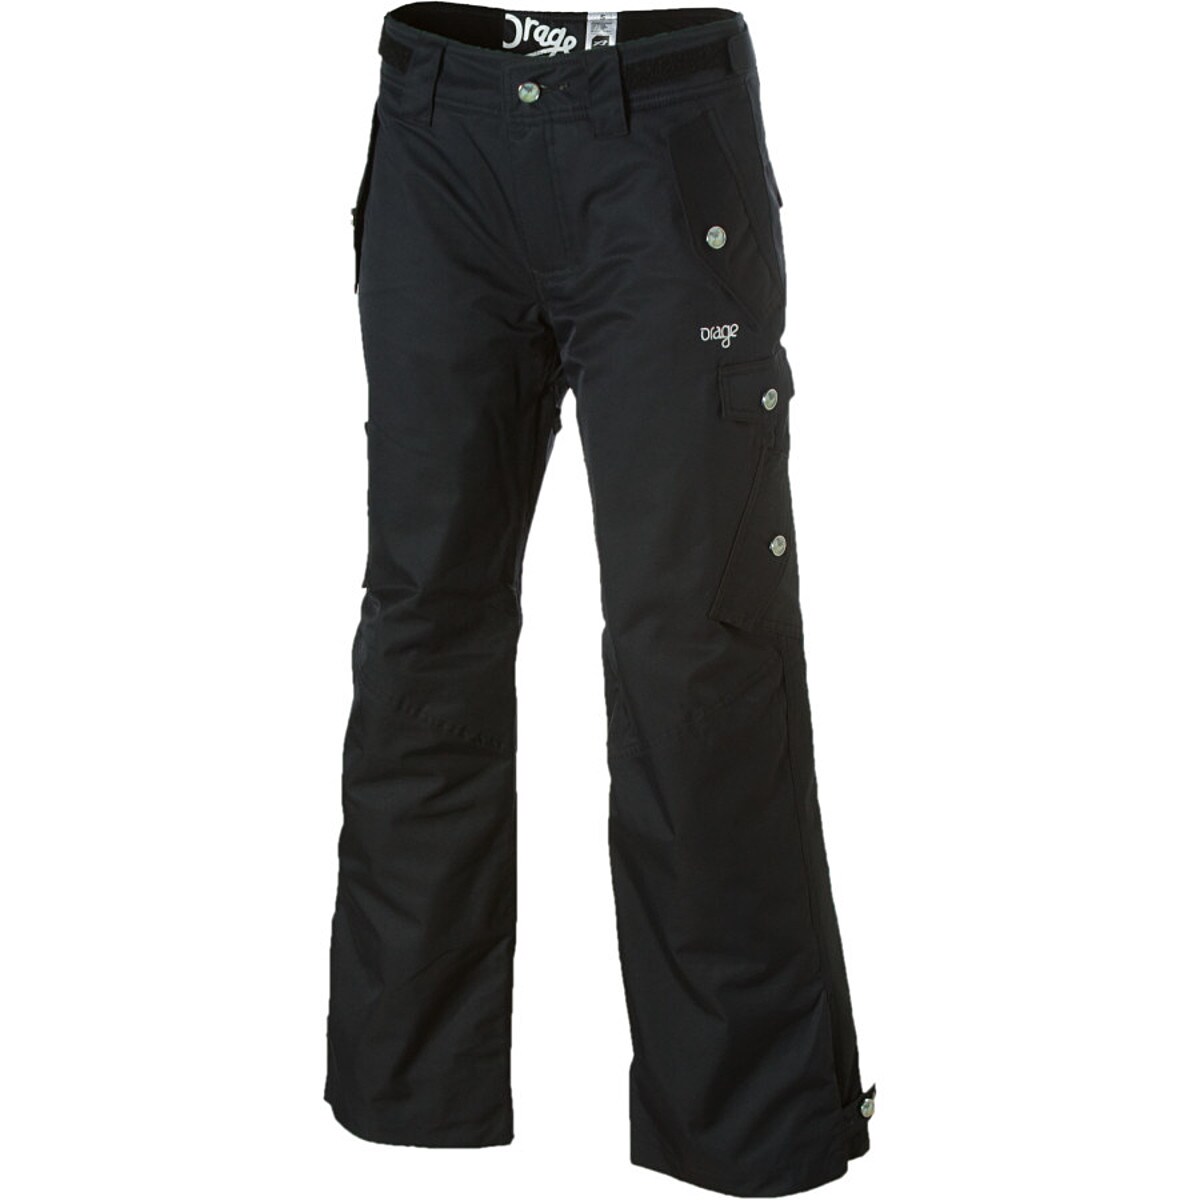 Orage Bella Insulated Pant - Women's - Clothing